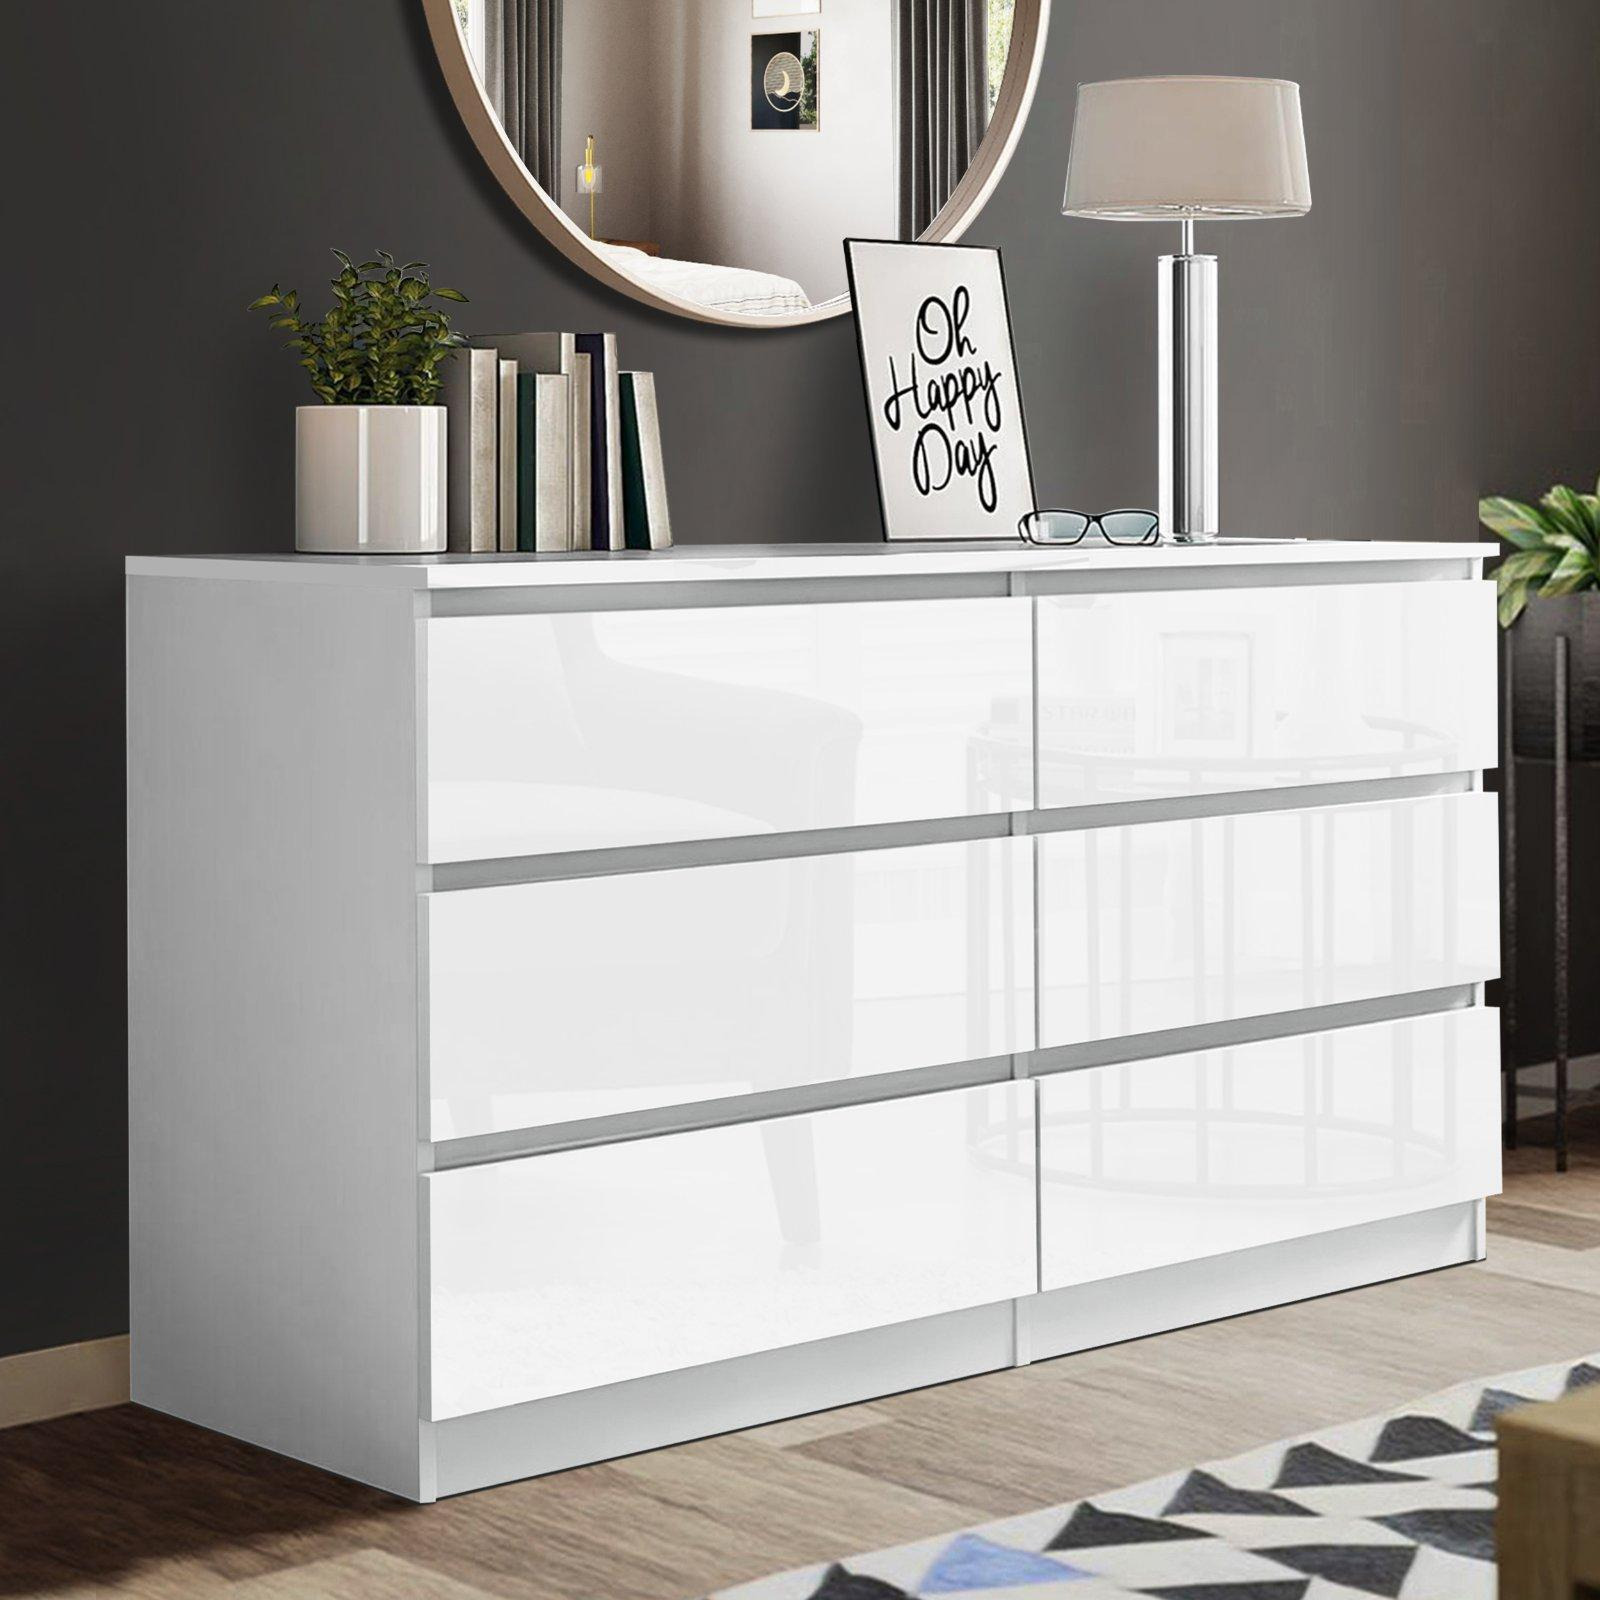 Carlton Gloss Chest of Drawers 6 Drawer Cabinet - image 1